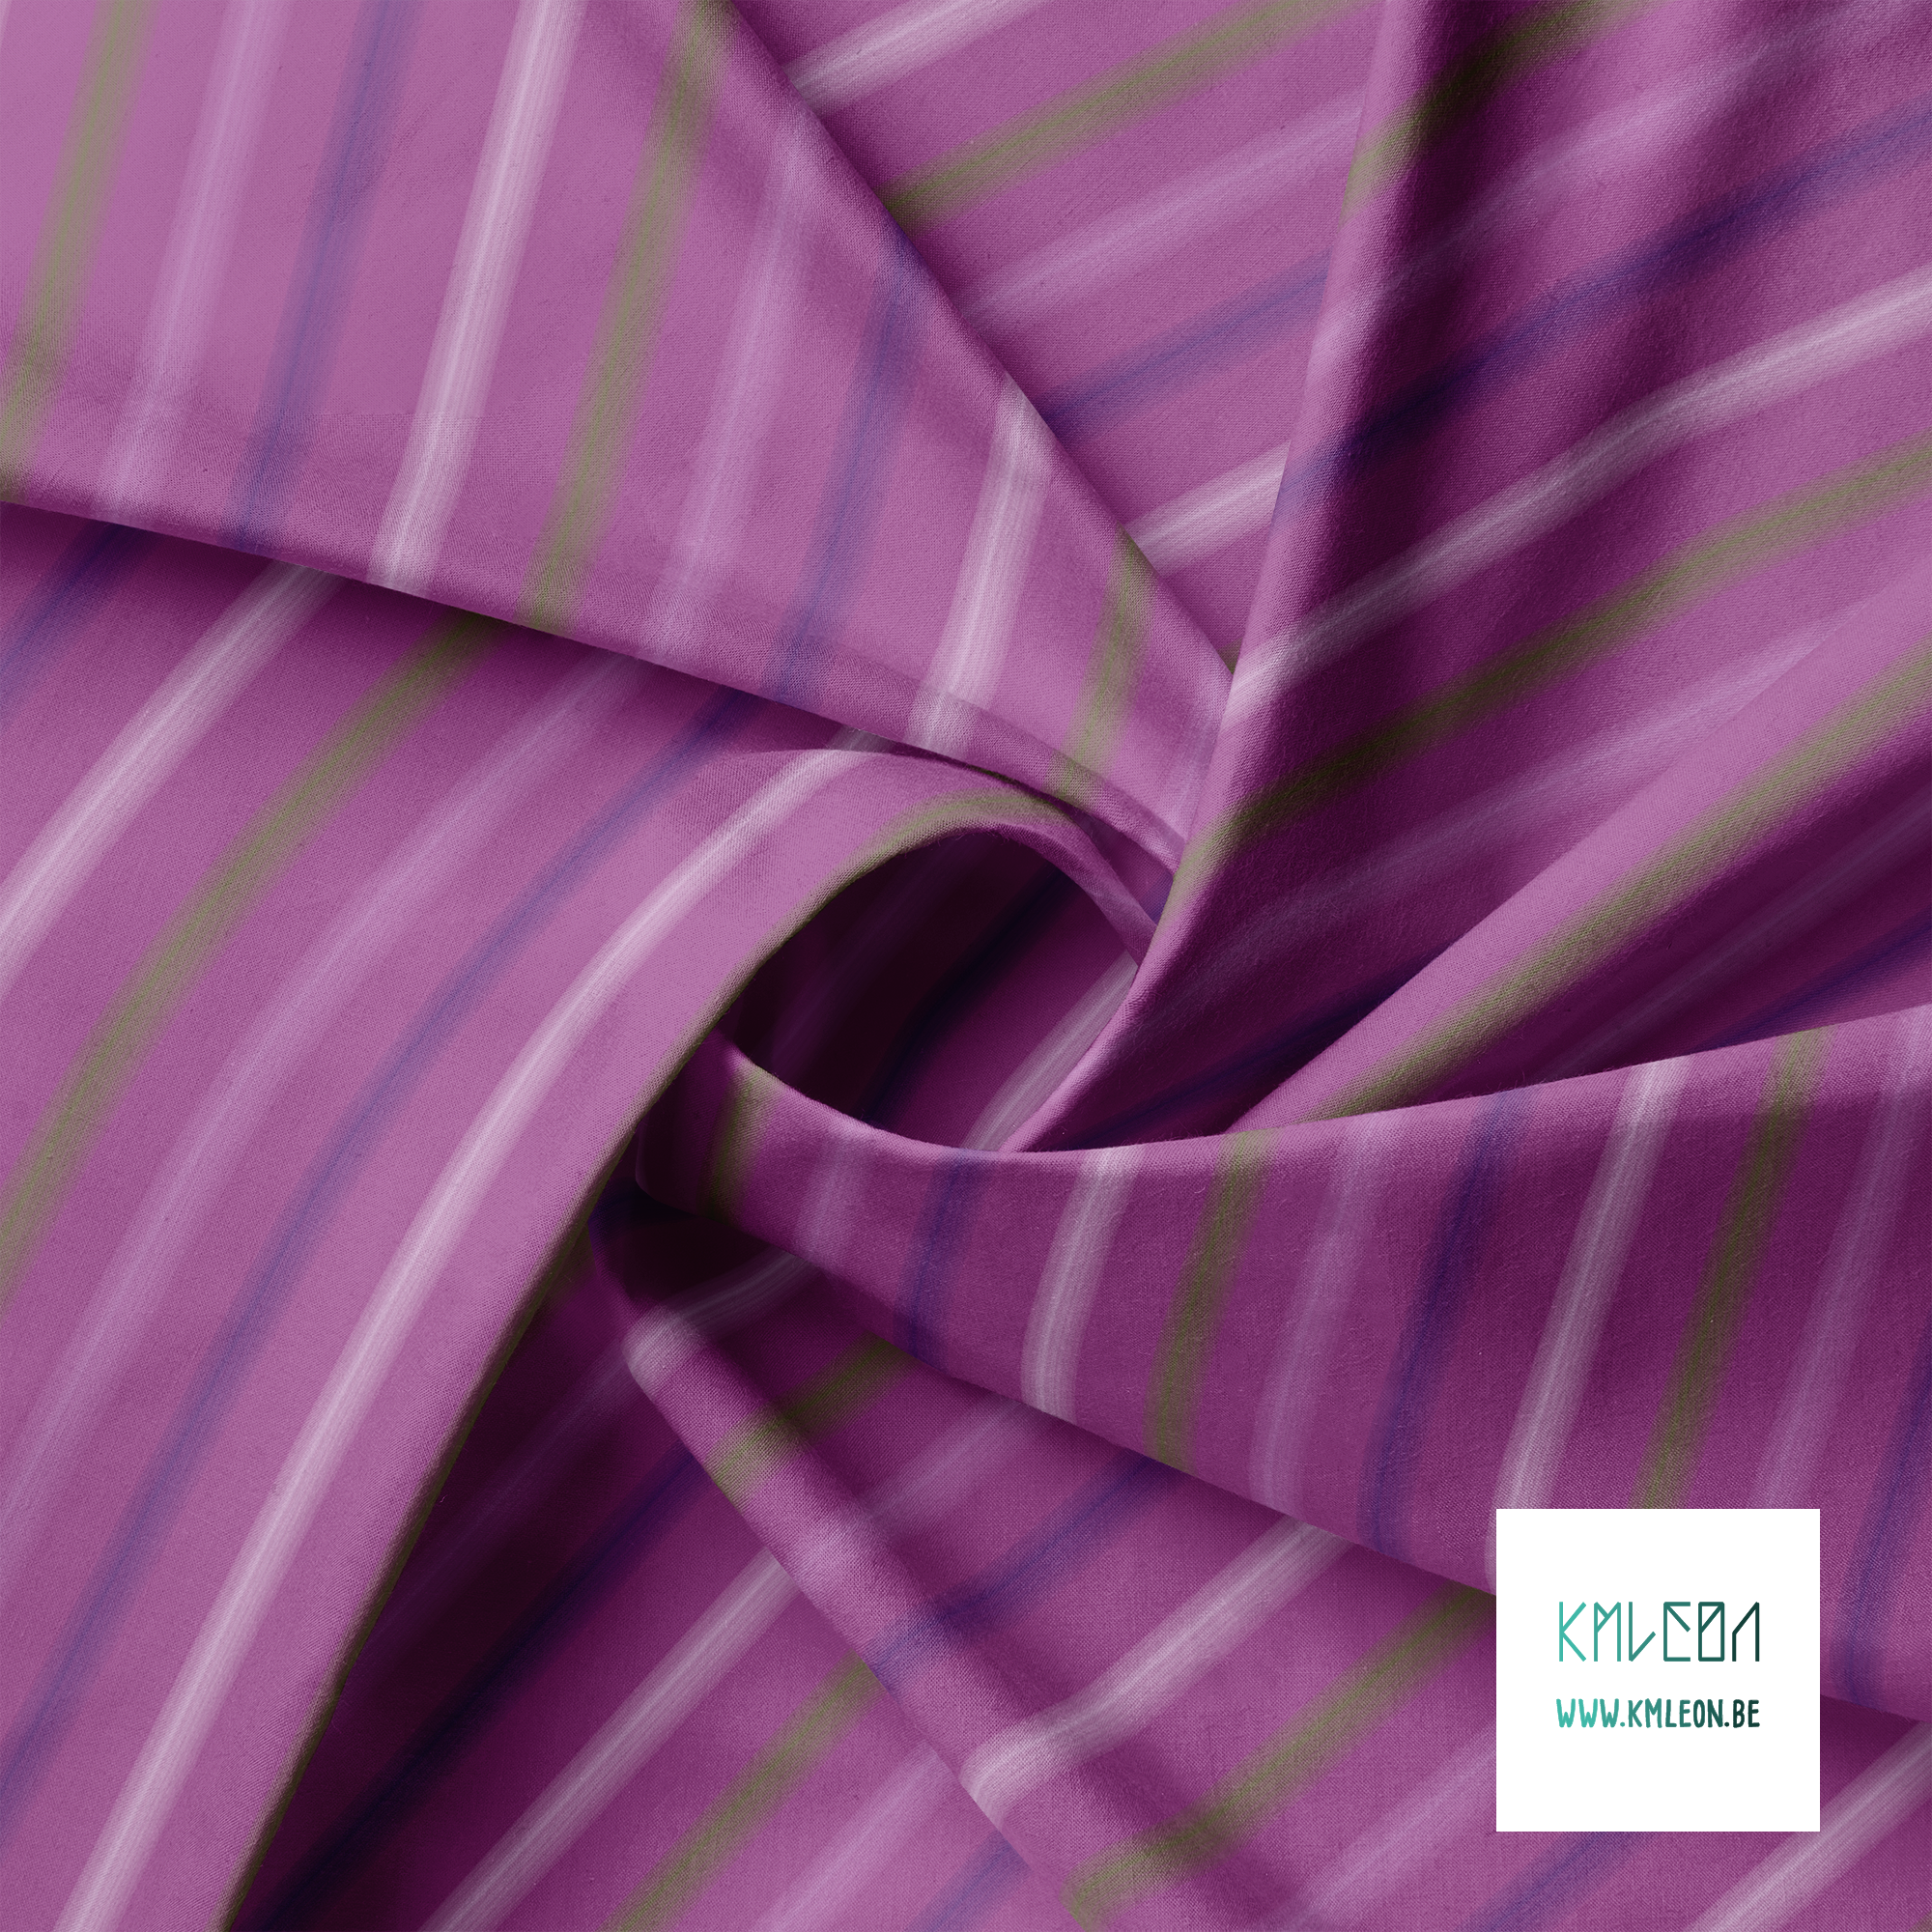 Soft horizontal stripes in purple and green fabric